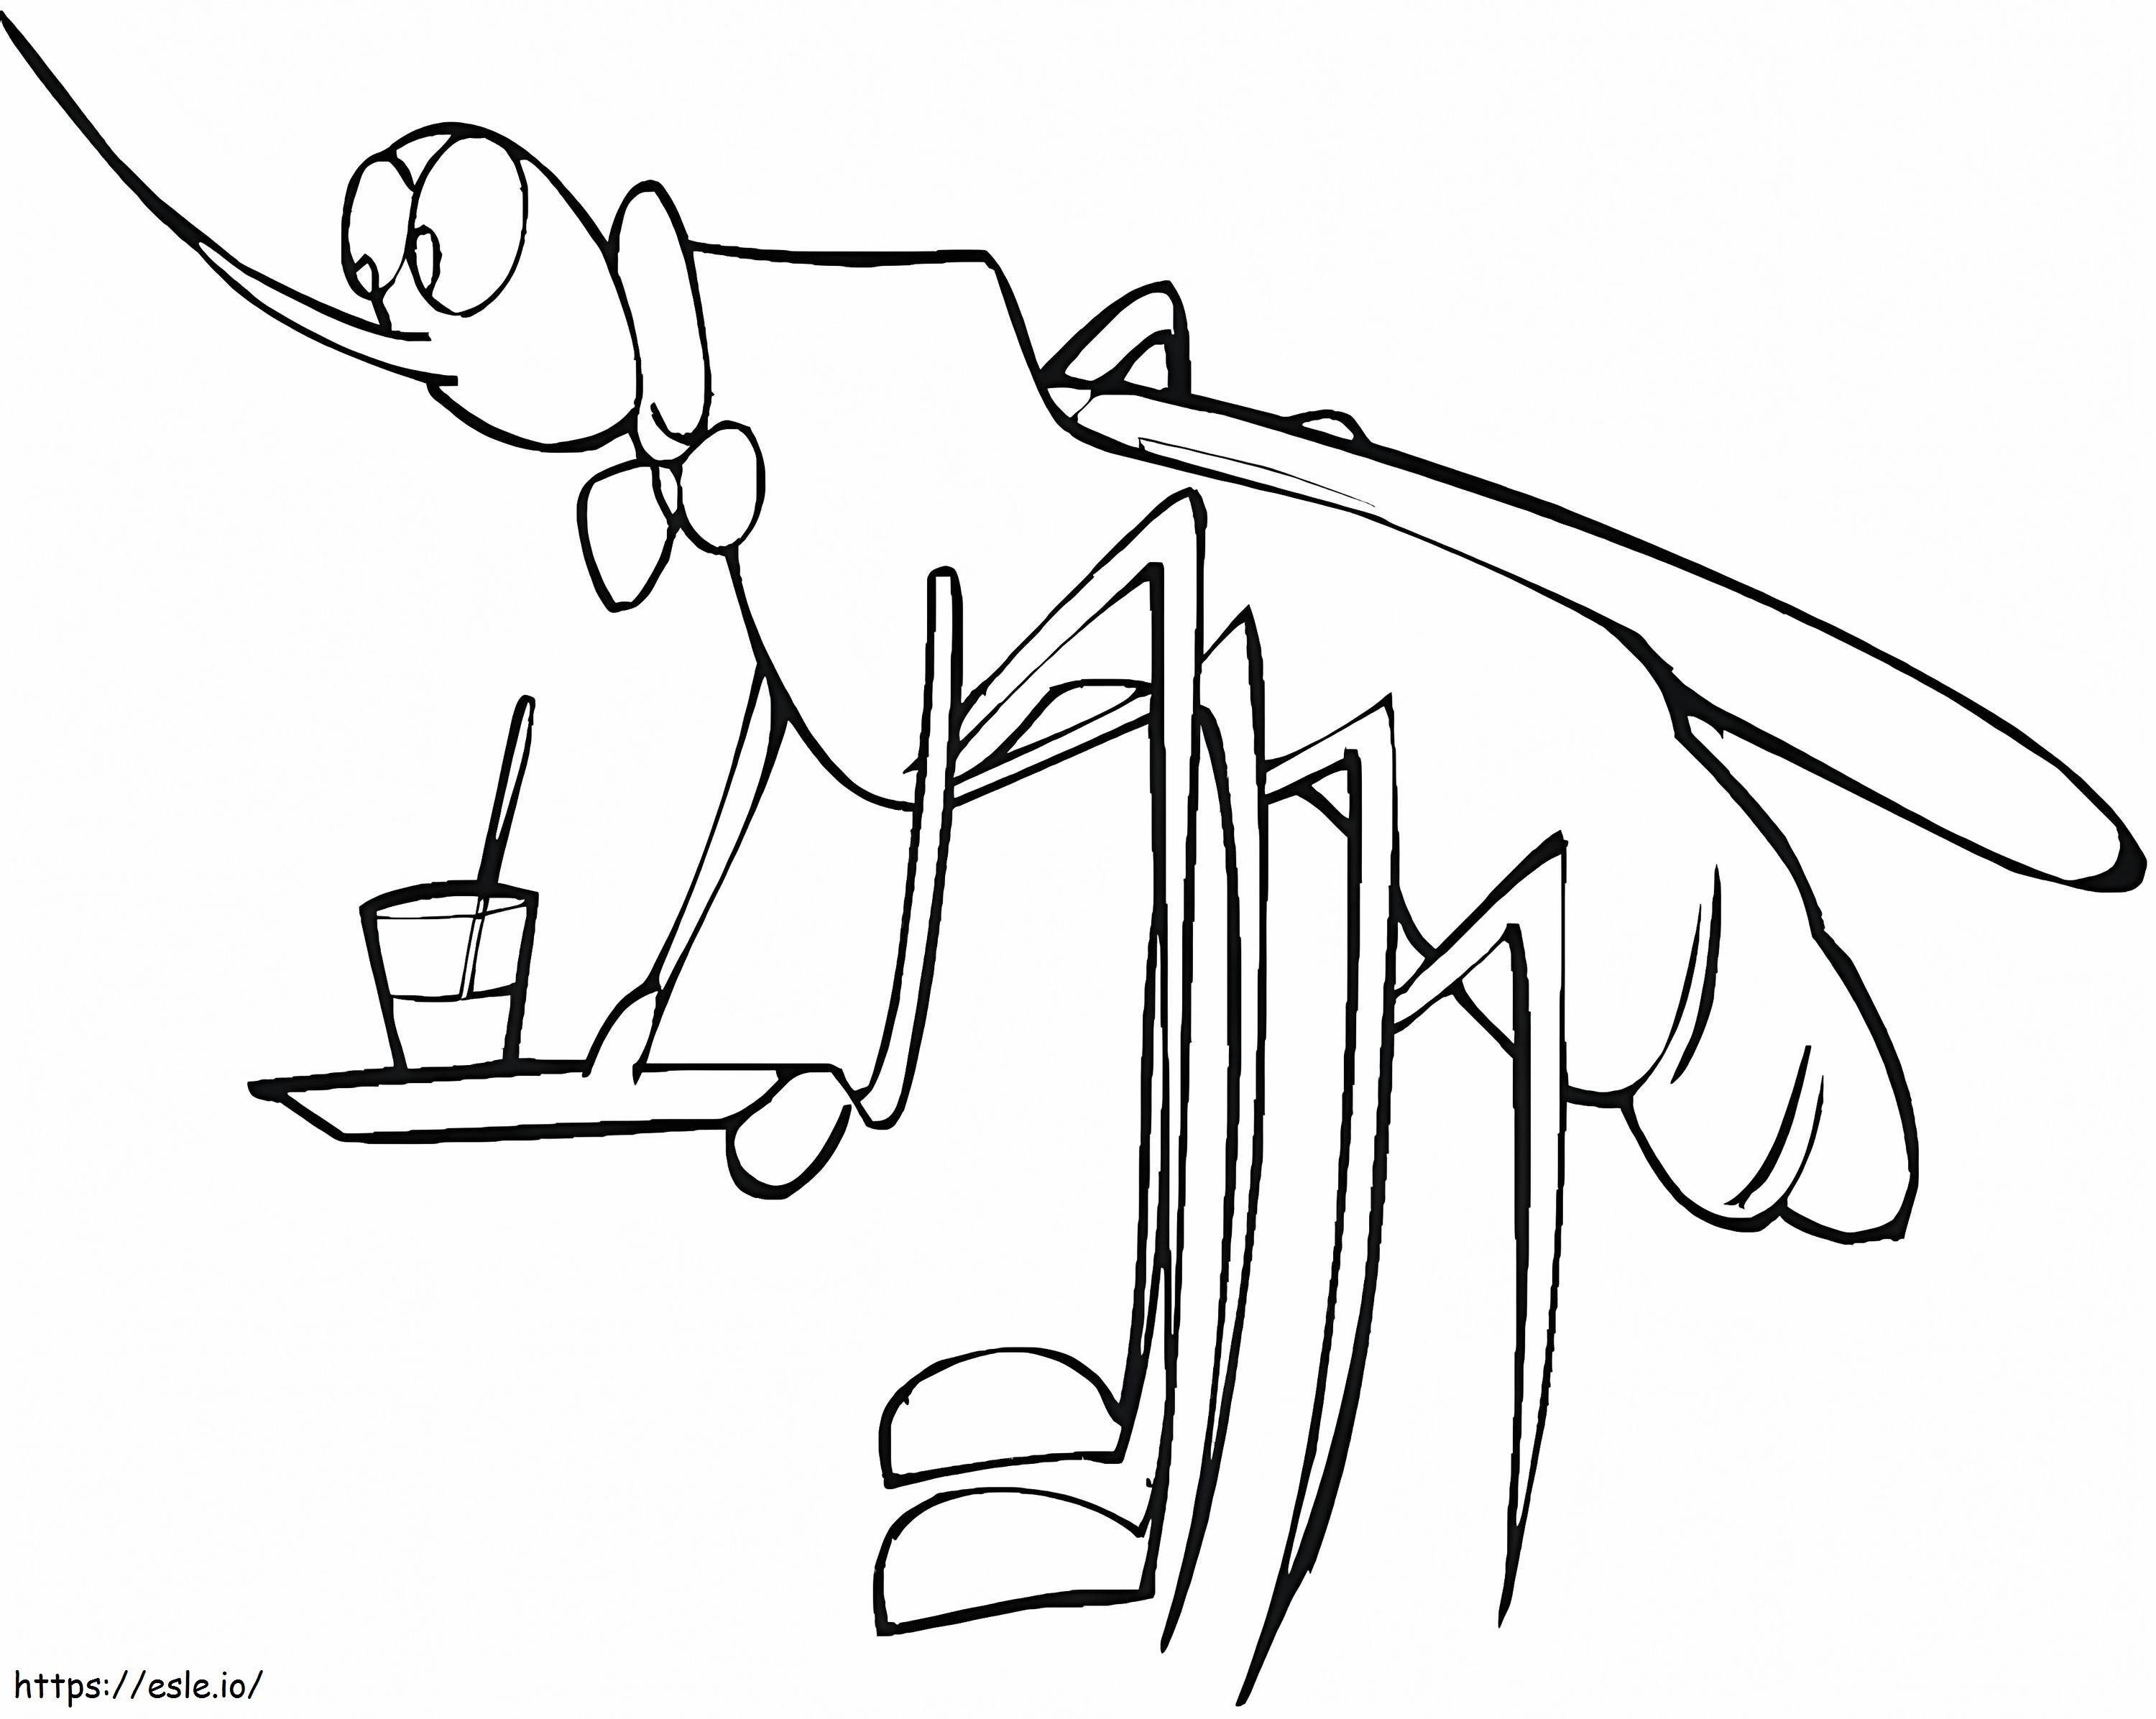 Waiter Mosquito coloring page